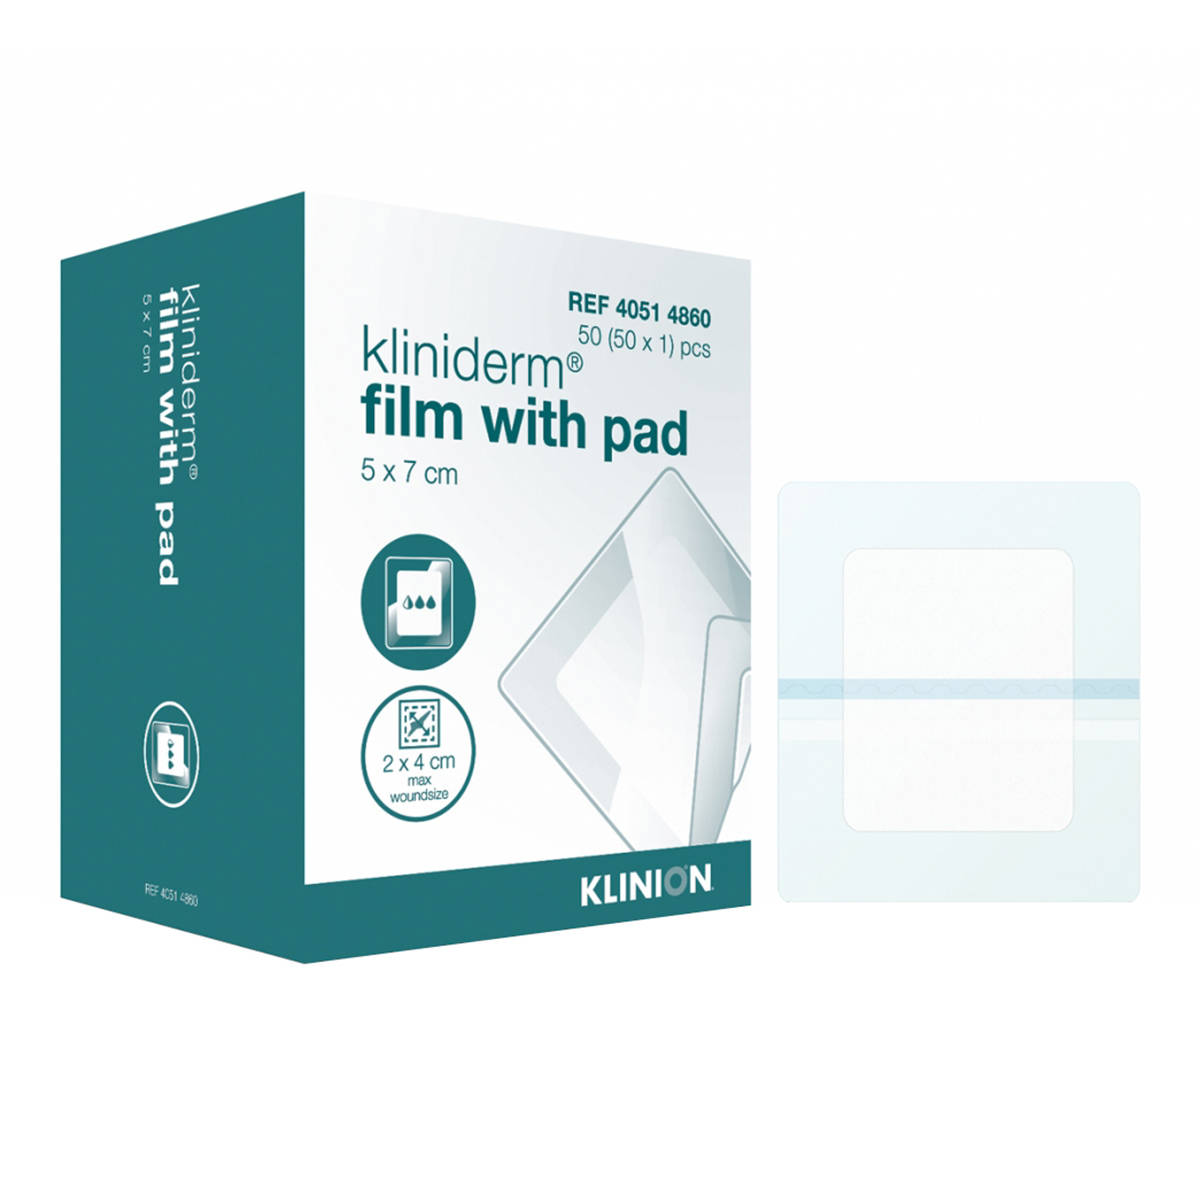 Film with pad dressing with box